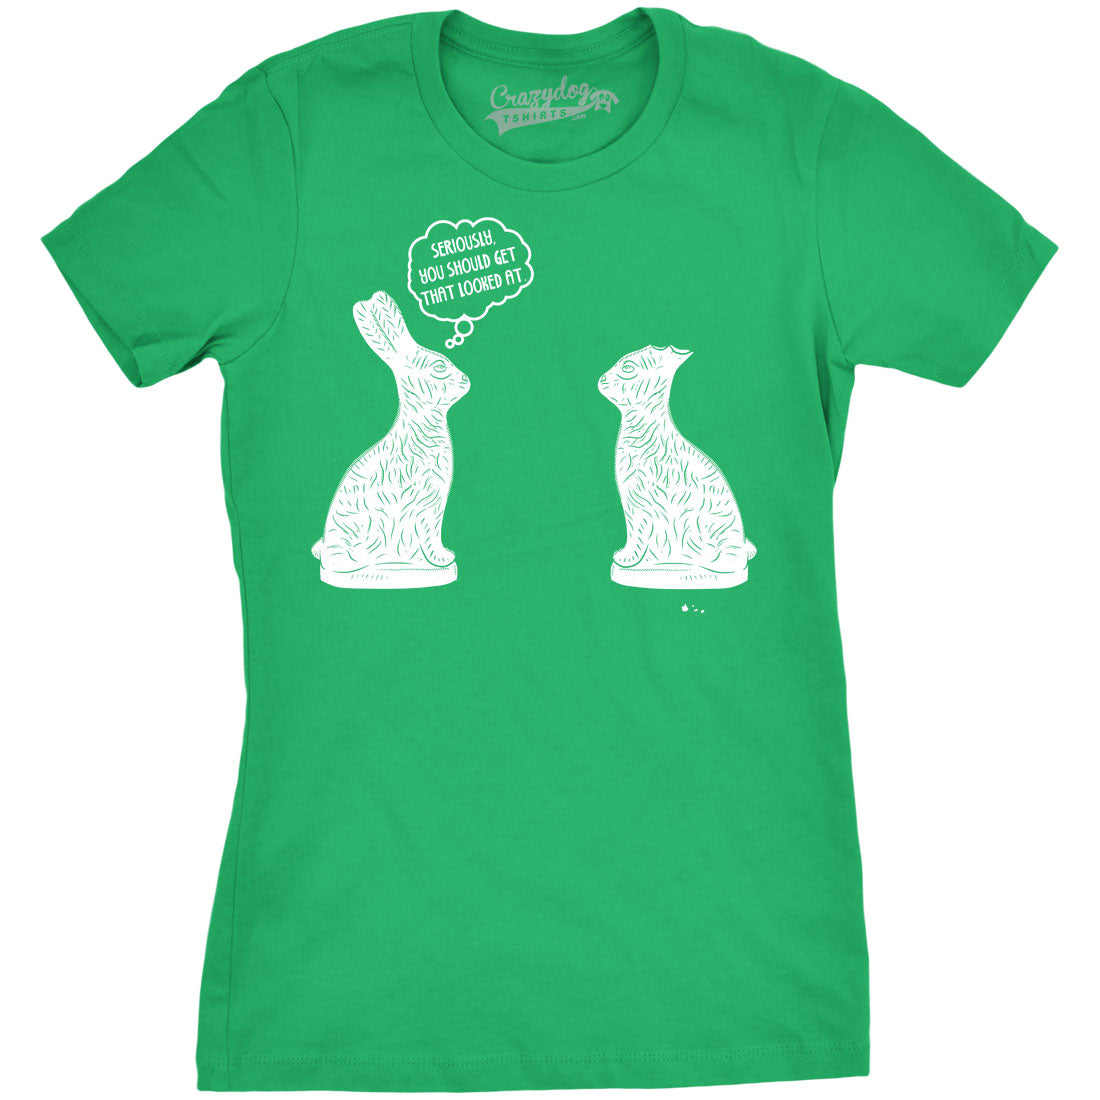 Funny Green You Should Get That Looked At Womens T Shirt Nerdy Easter Tee